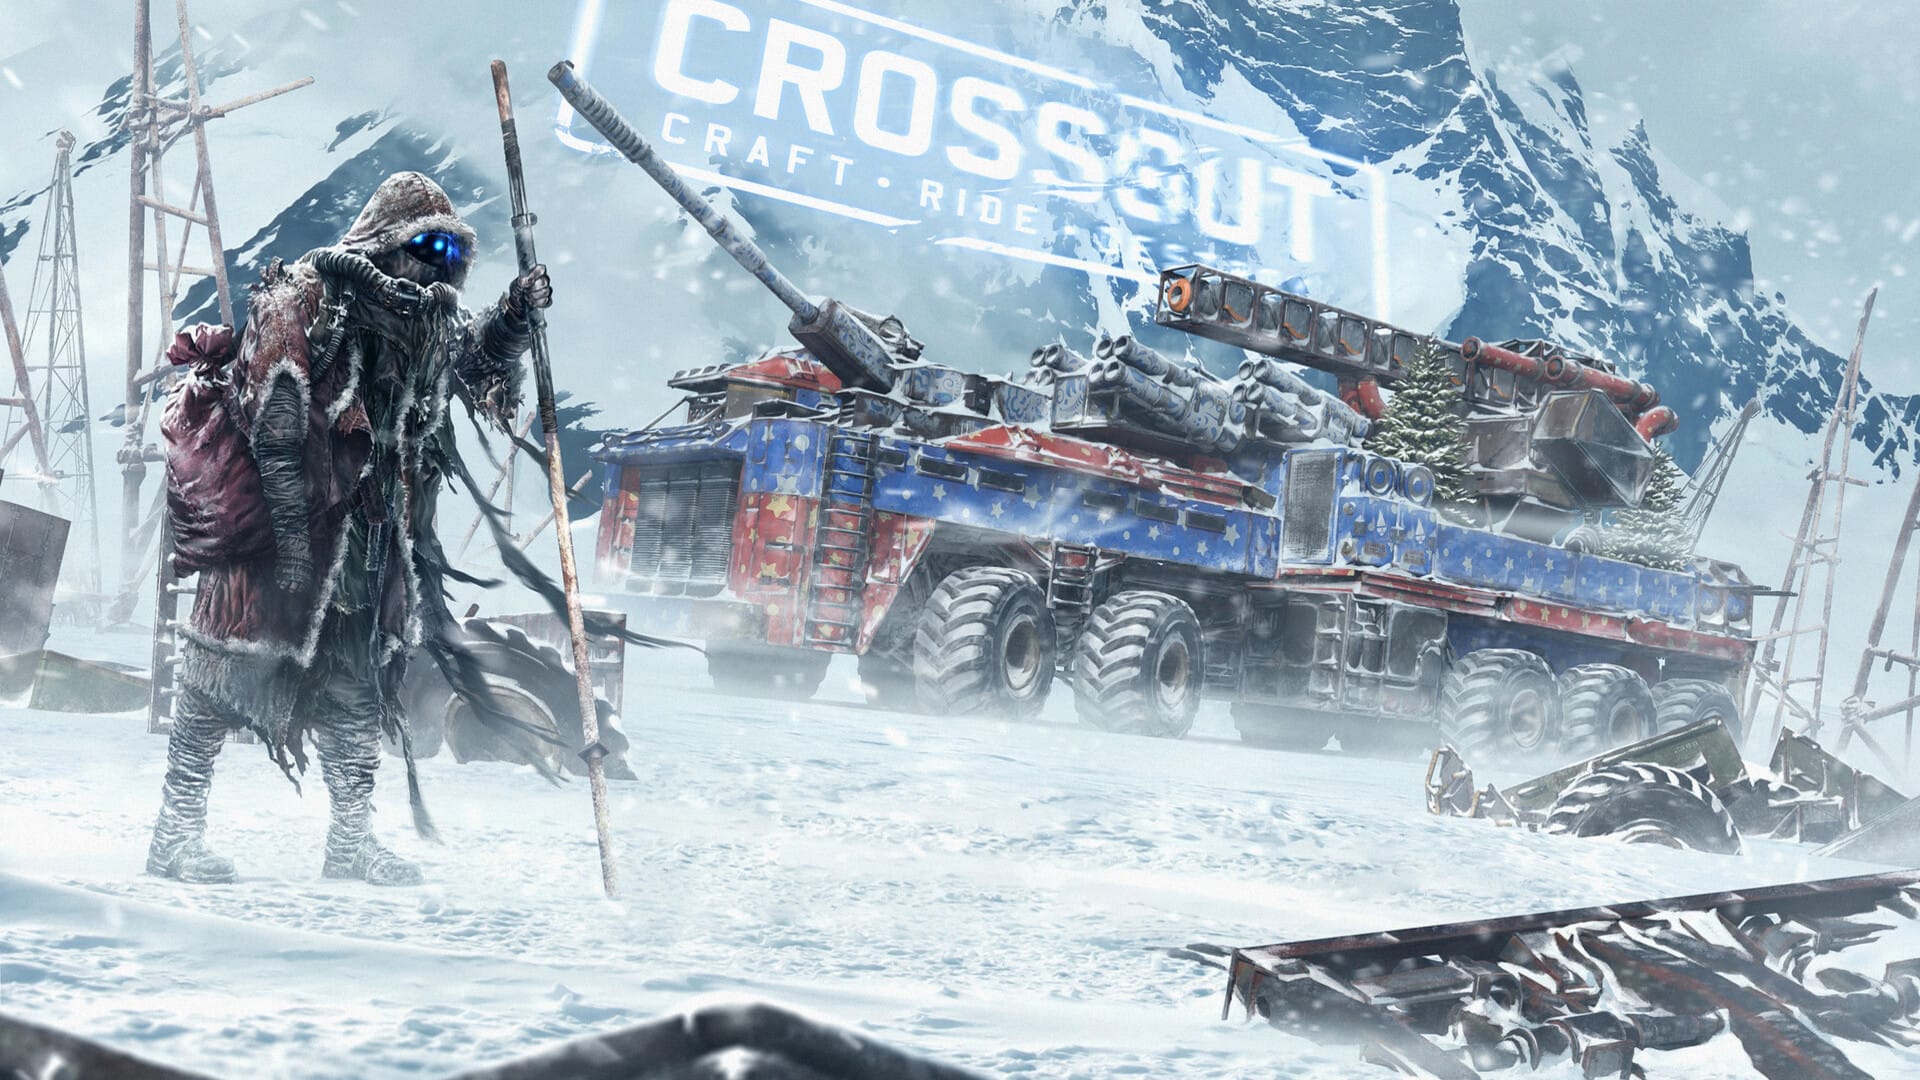 Crossout 2021 Wallpapers